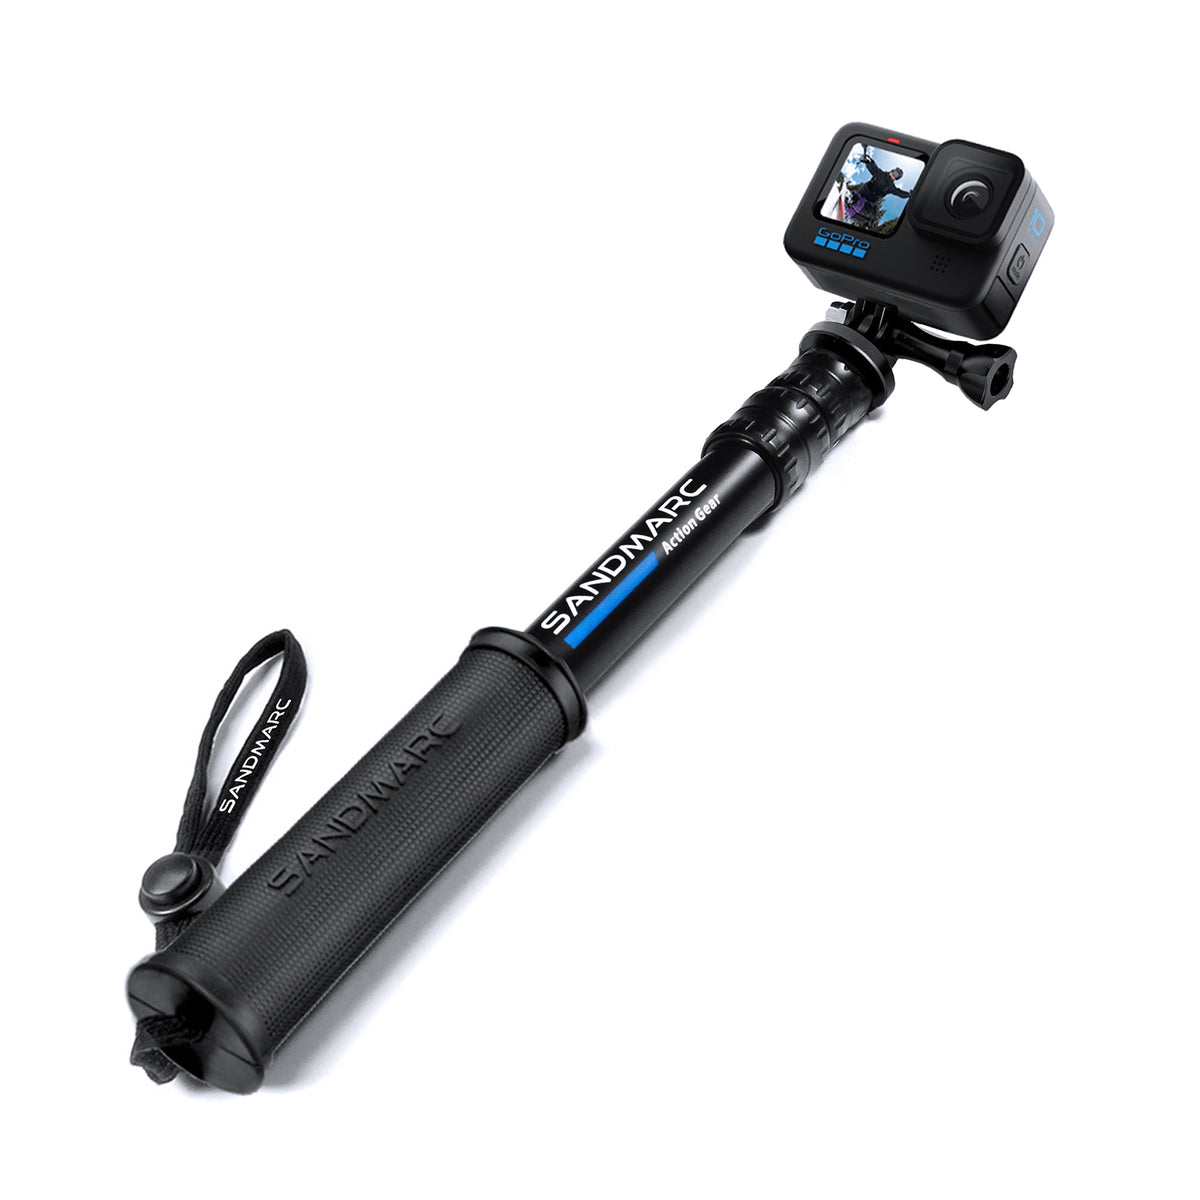 GoPro Pole (Stick) for GoPro Hero 12, 11, 10, 9, 8, 7, 6, 5, 4 Cameras - SANDMARC Pole Compact Edition